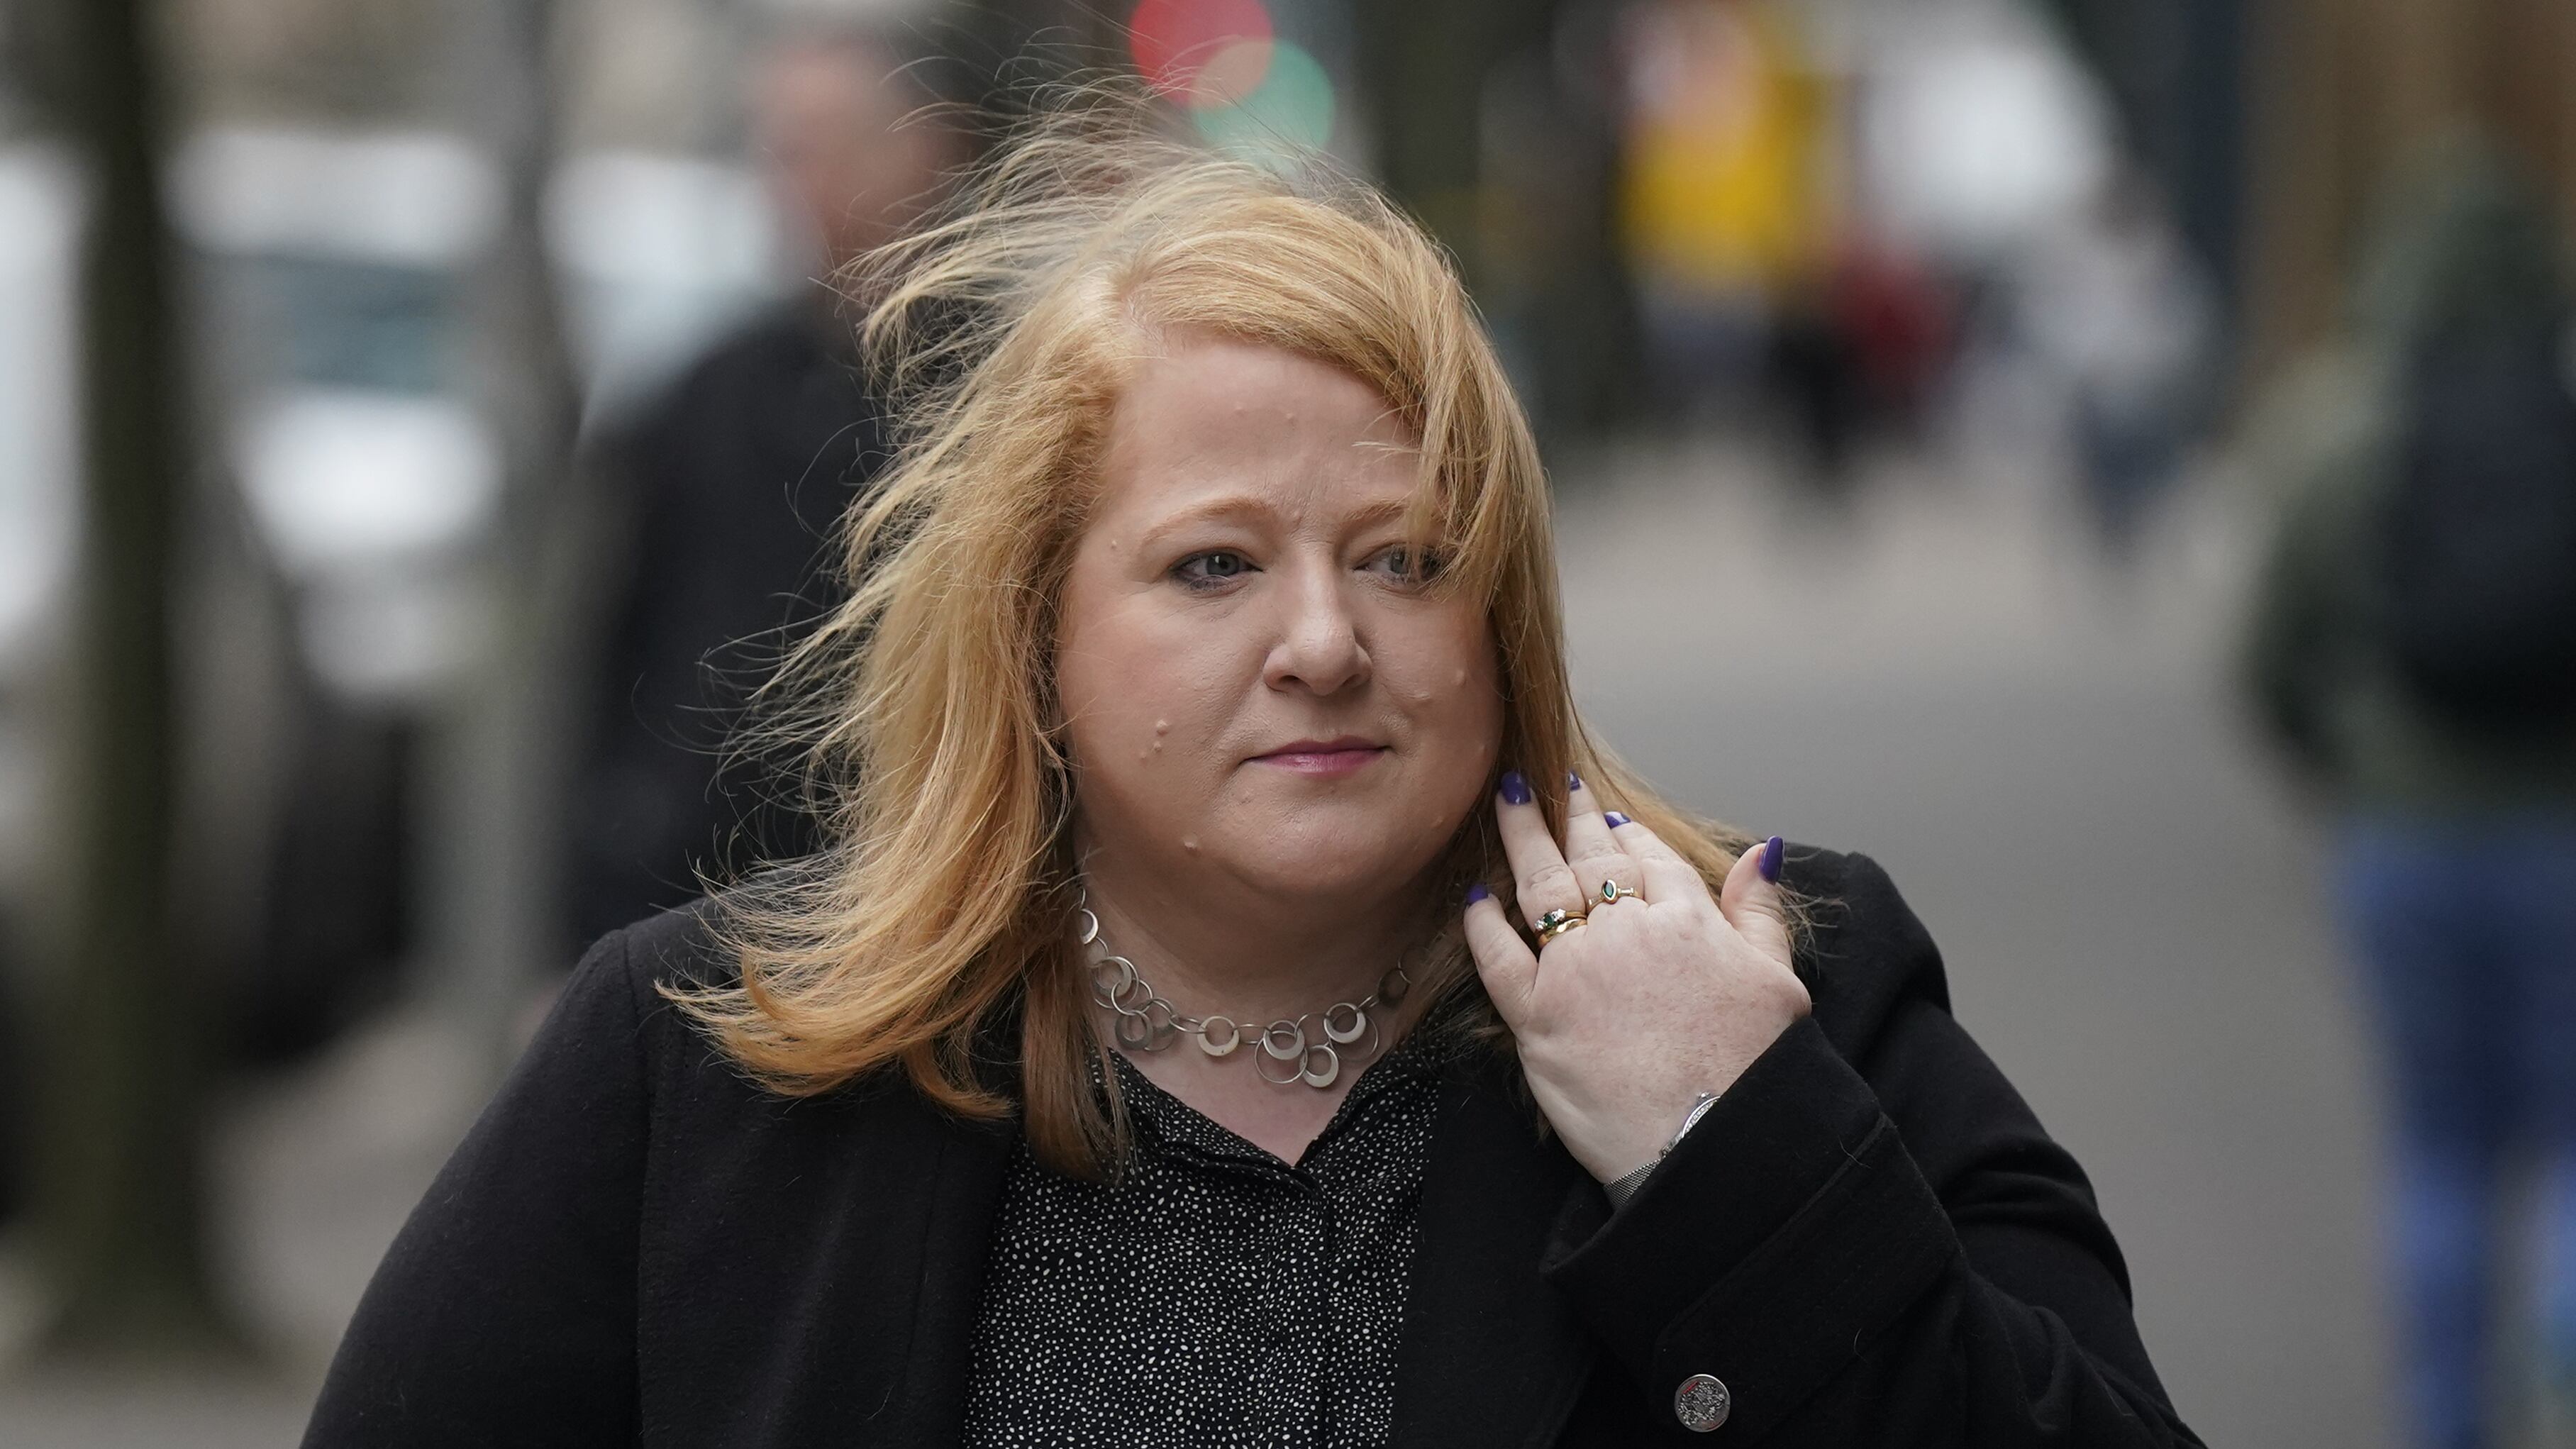 Naomi Long said there no plans to make a description of another person’s biological sex a criminal offence